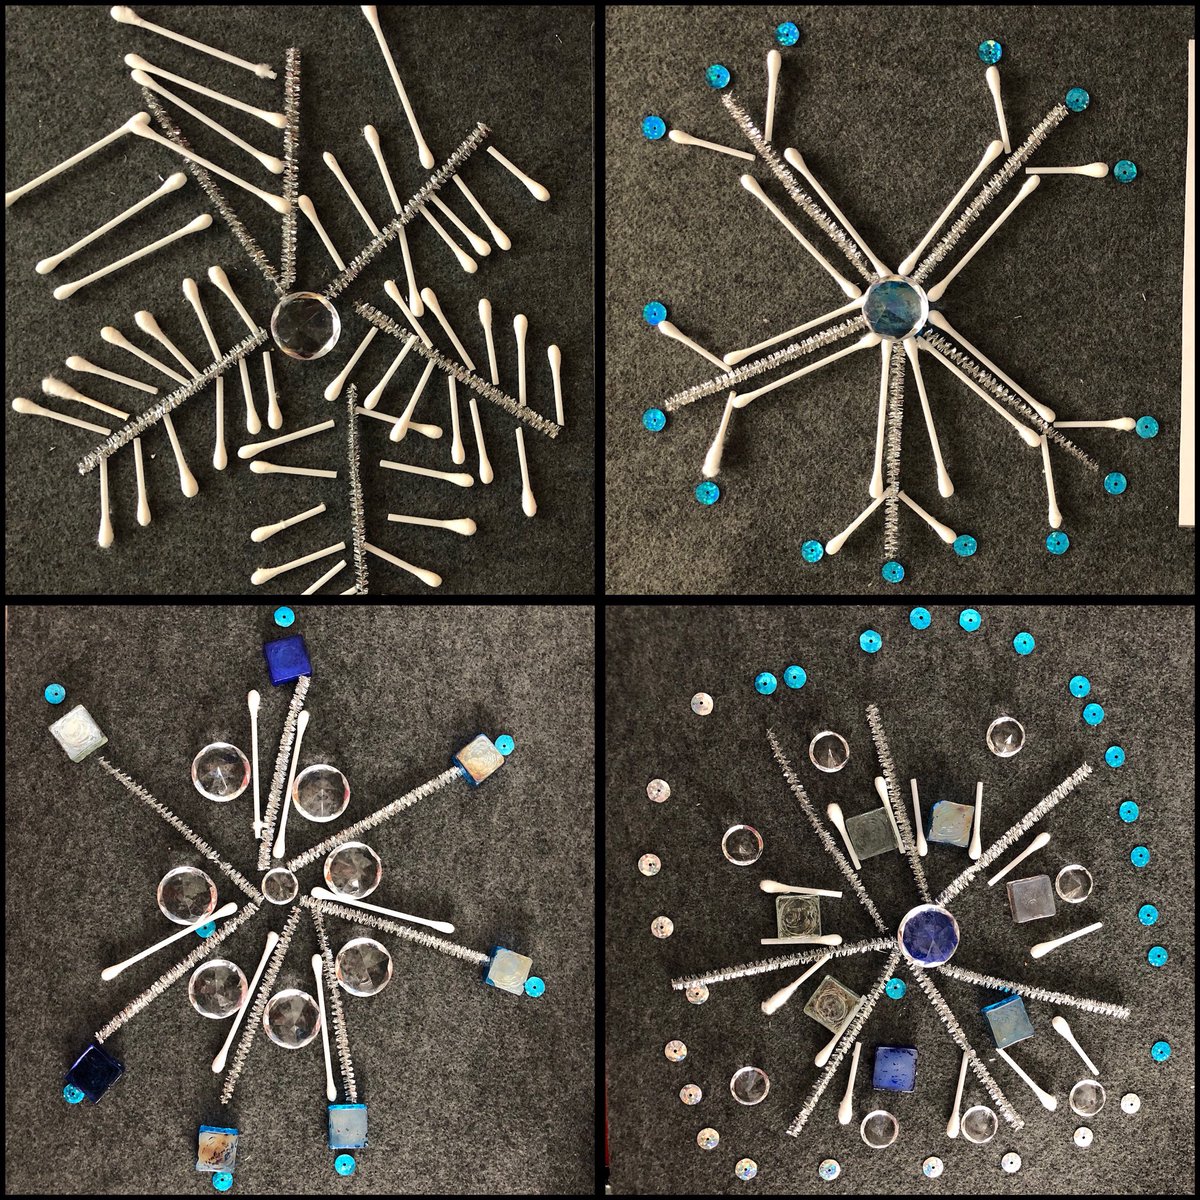 Darla Myers on Twitter: "Exploring snowflakes through loose parts and oil  pastels.… "